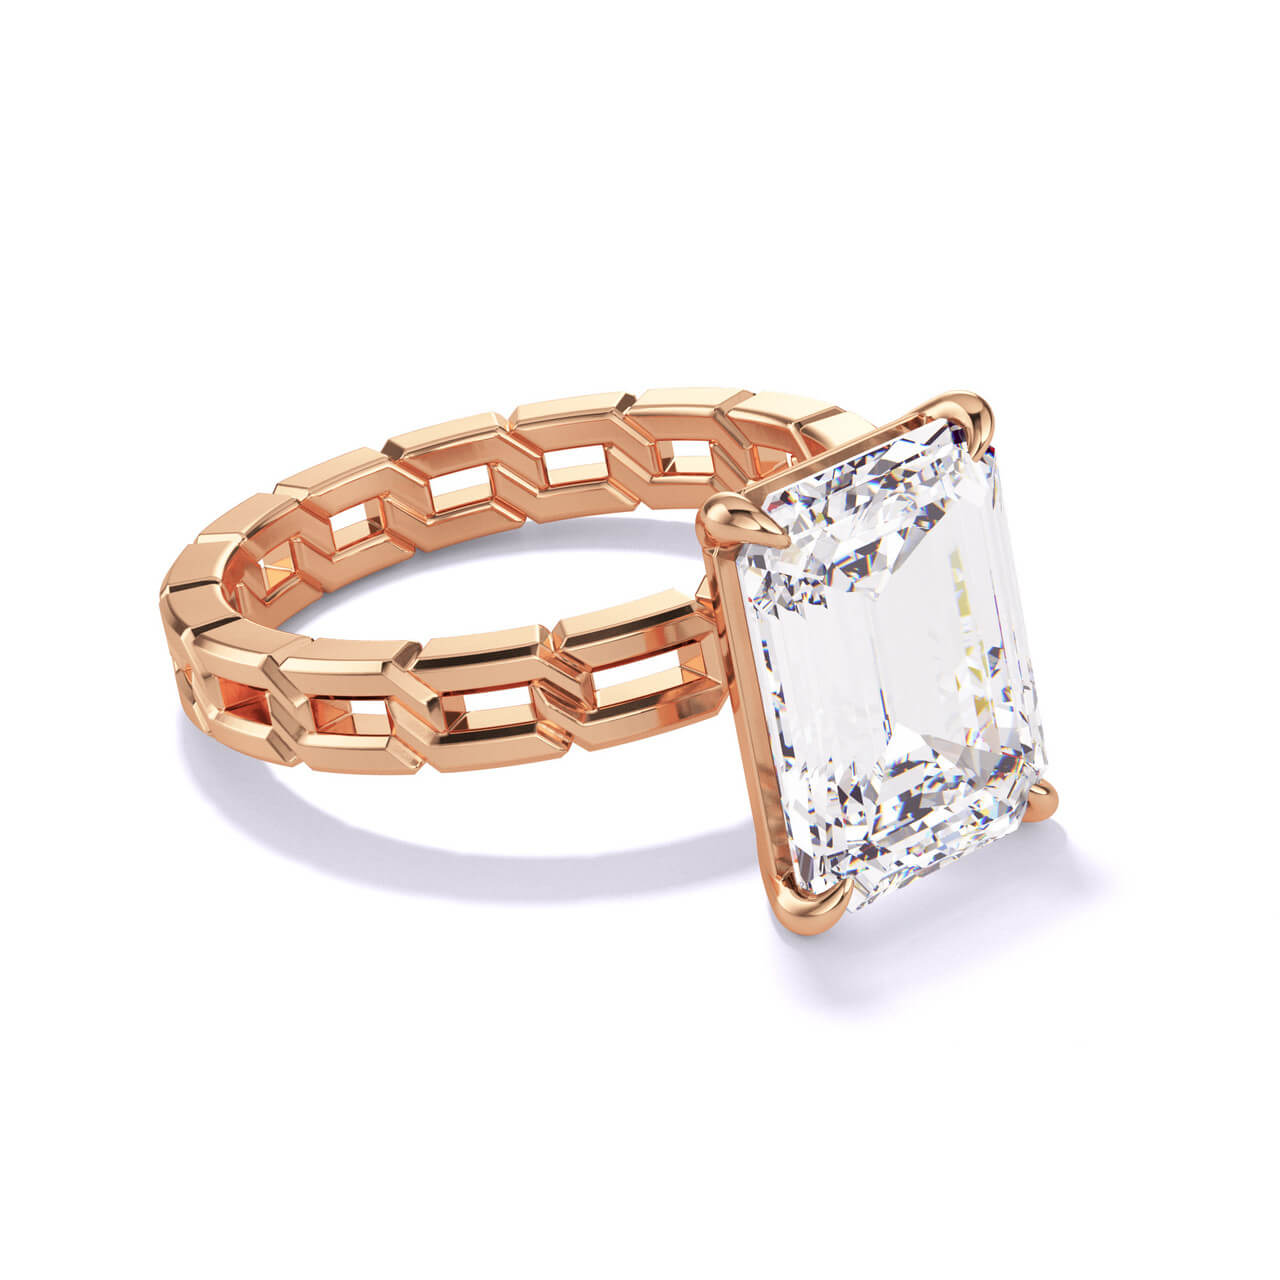 2023 engagement ring trends